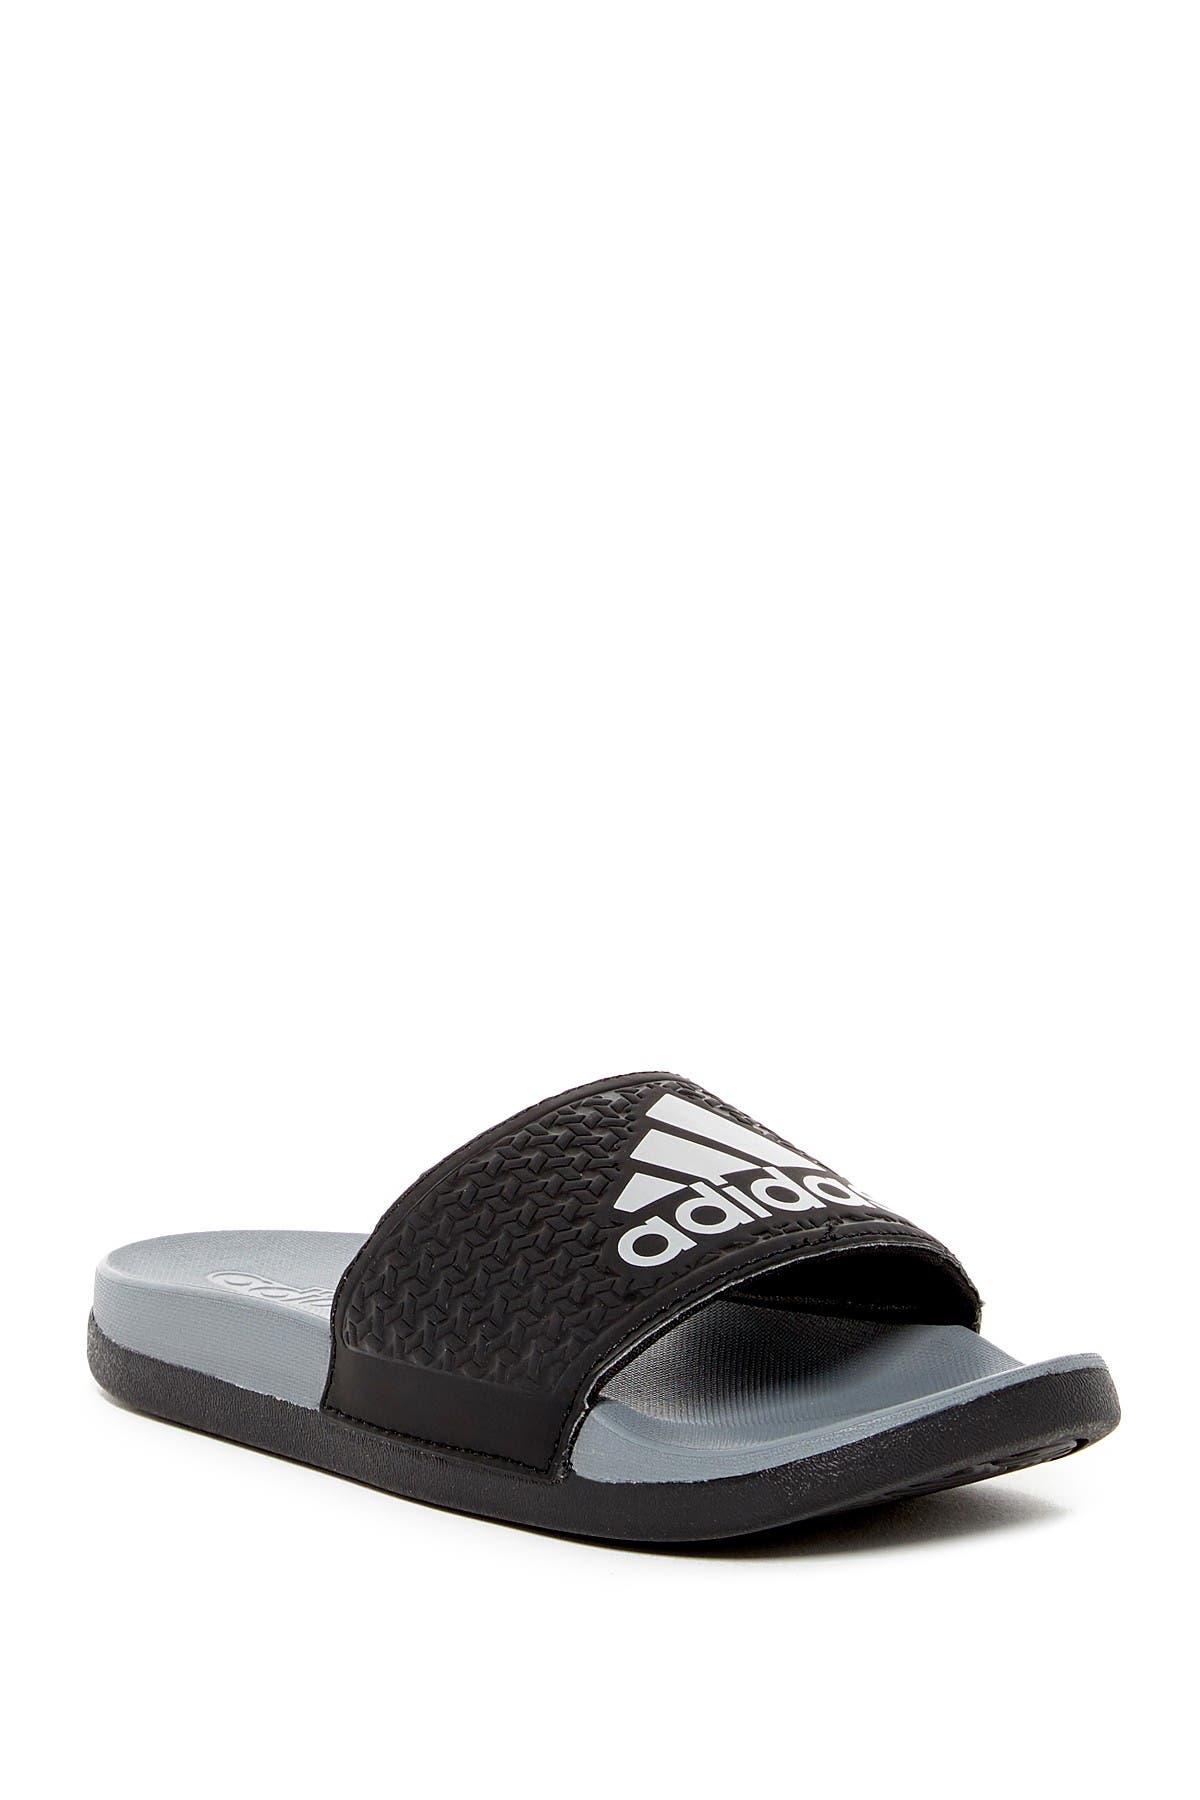 toddler adidas slides with strap